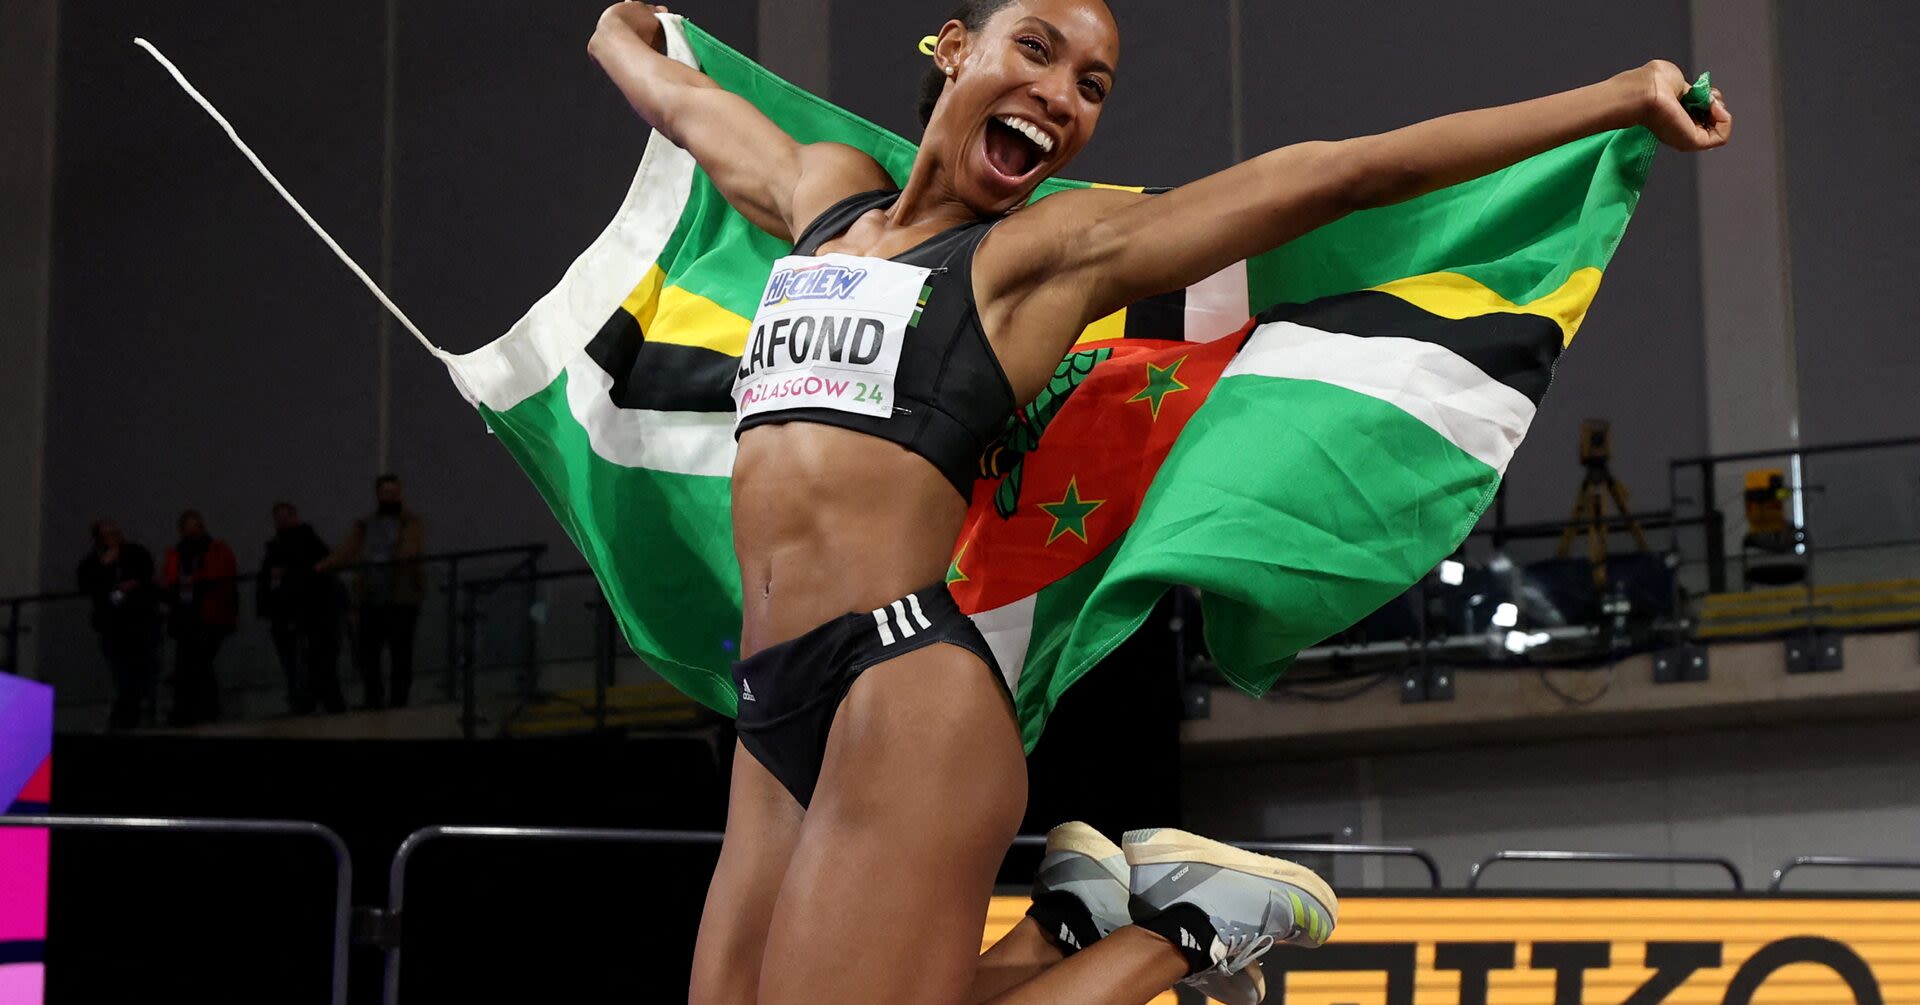 LaFond wins triple jump gold to bring Dominica first ever Olympic medal